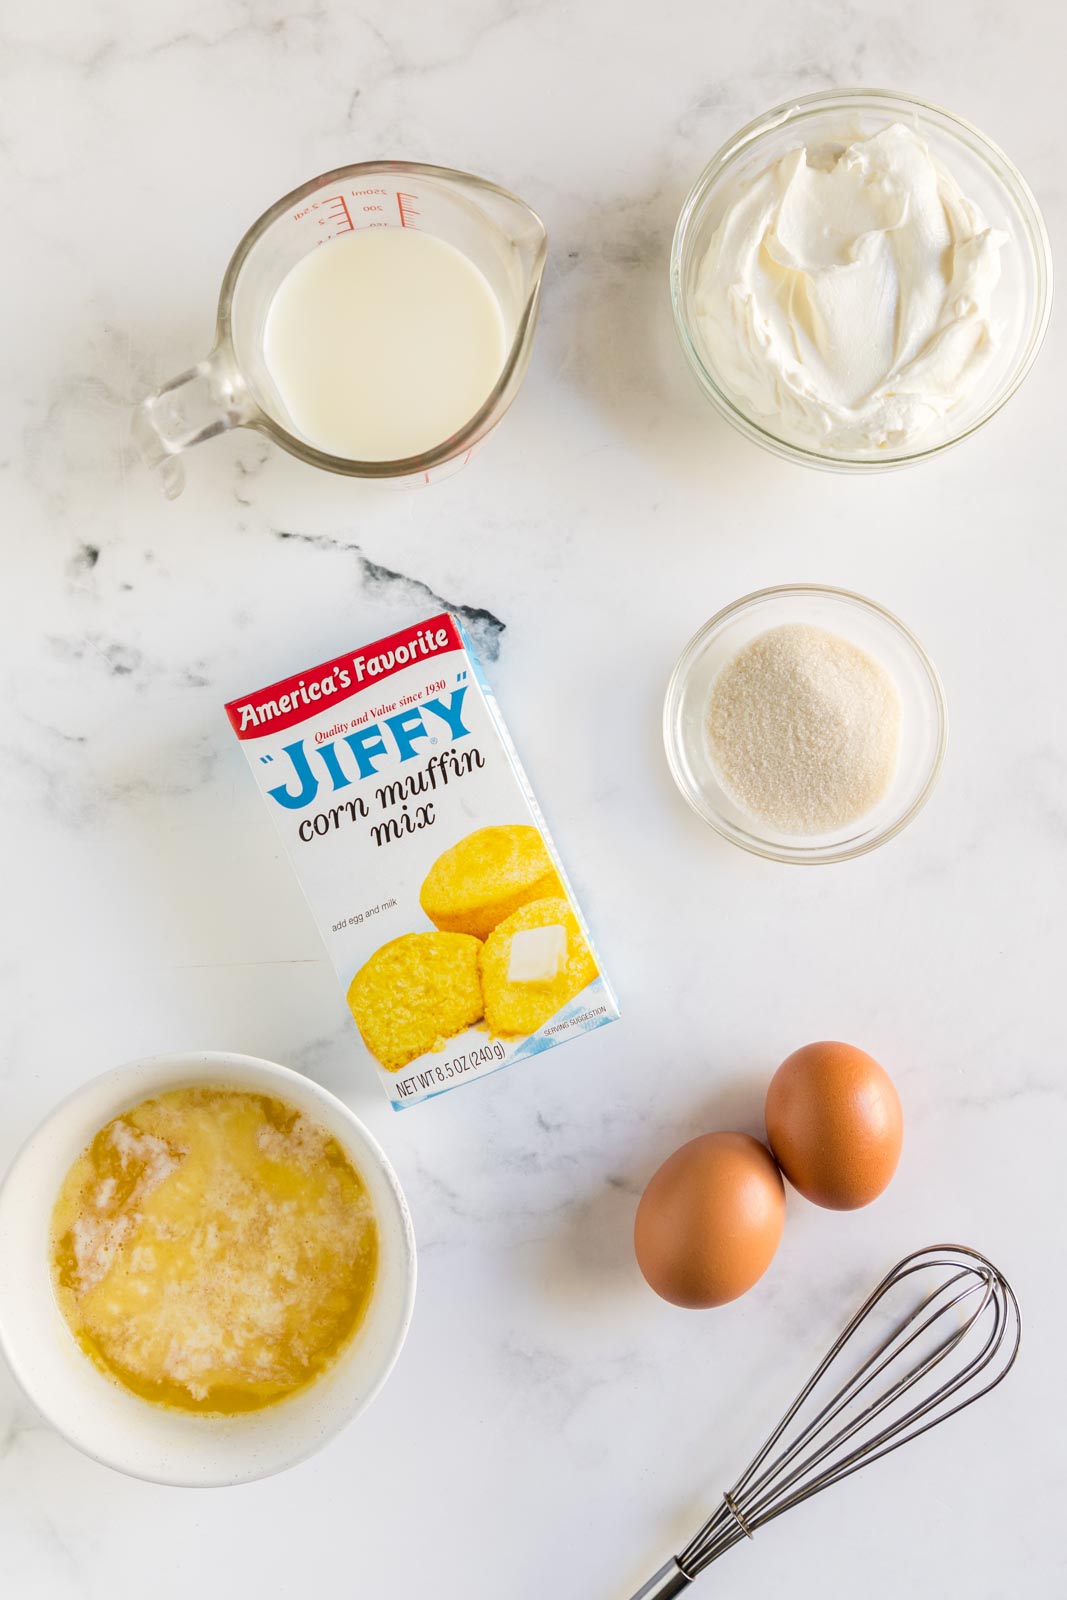 the ingredients for Jiffy cornbread laid out on a table 